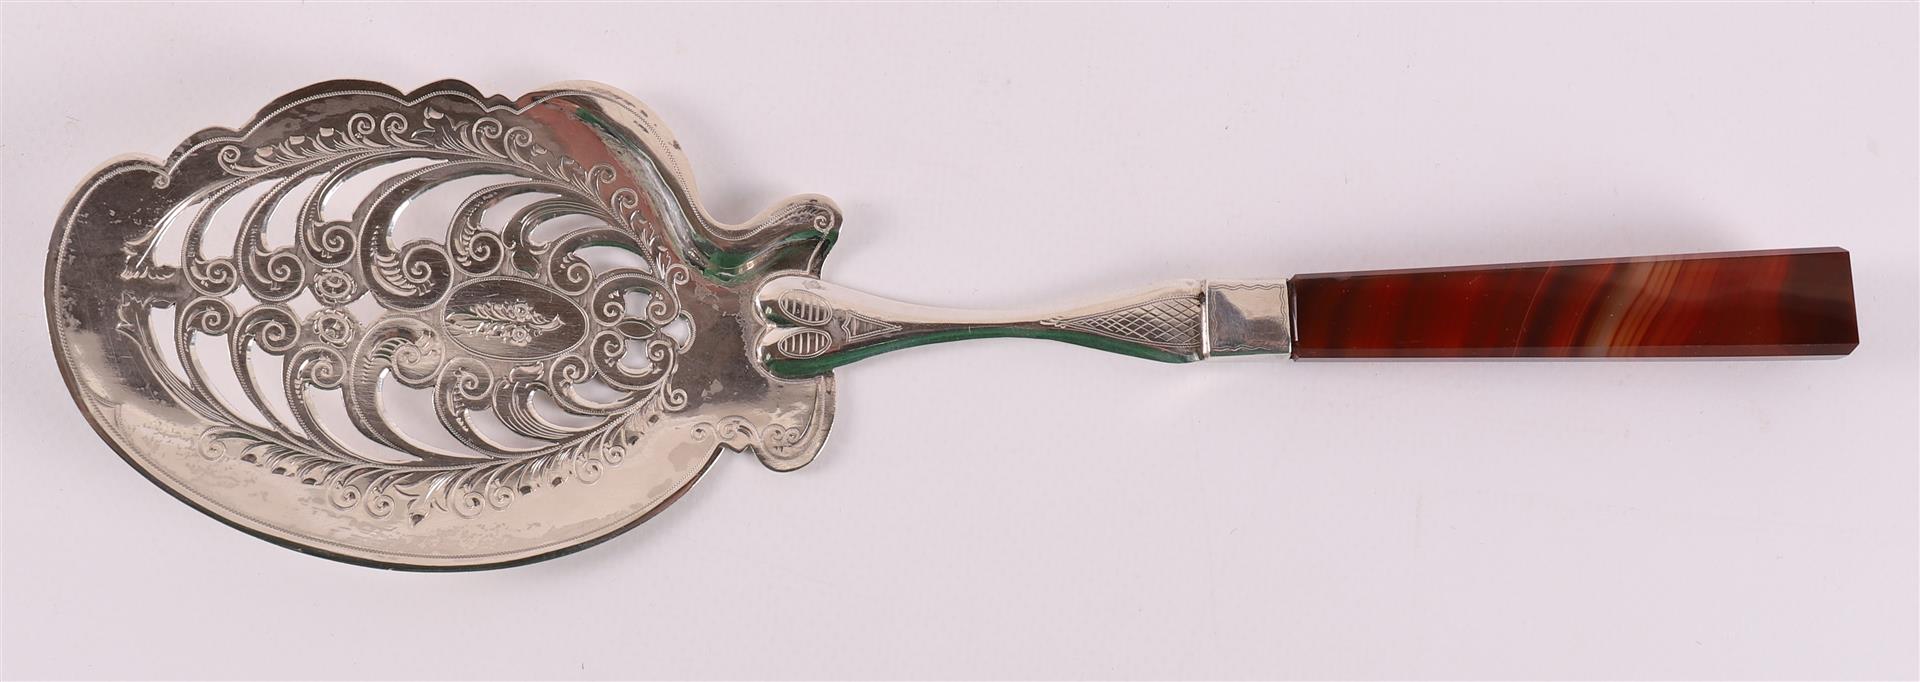 A silver pastry server with an agate handle, year letter 1882.